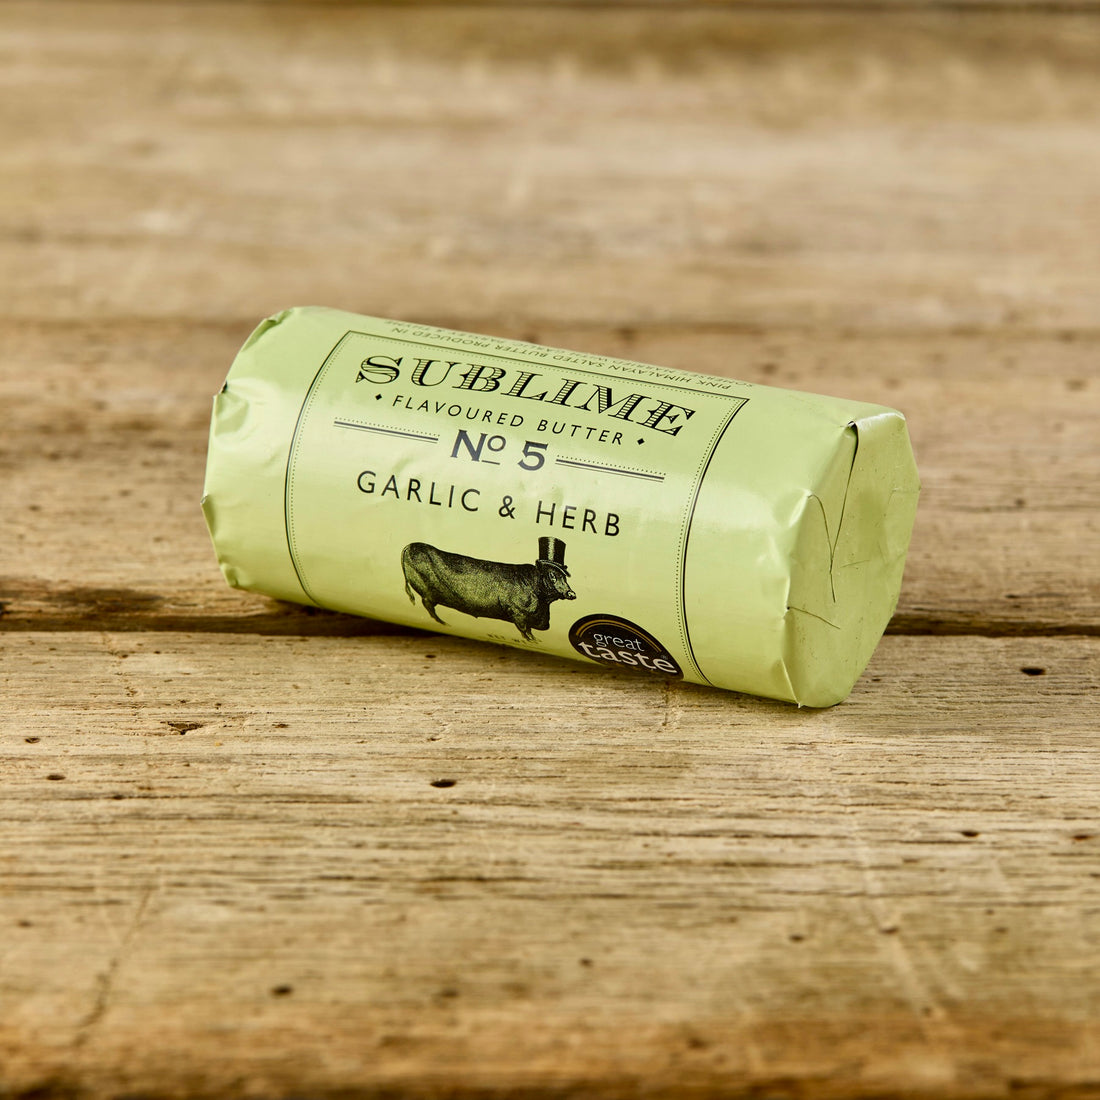 garlic and herb flavoured butter by sublime butter